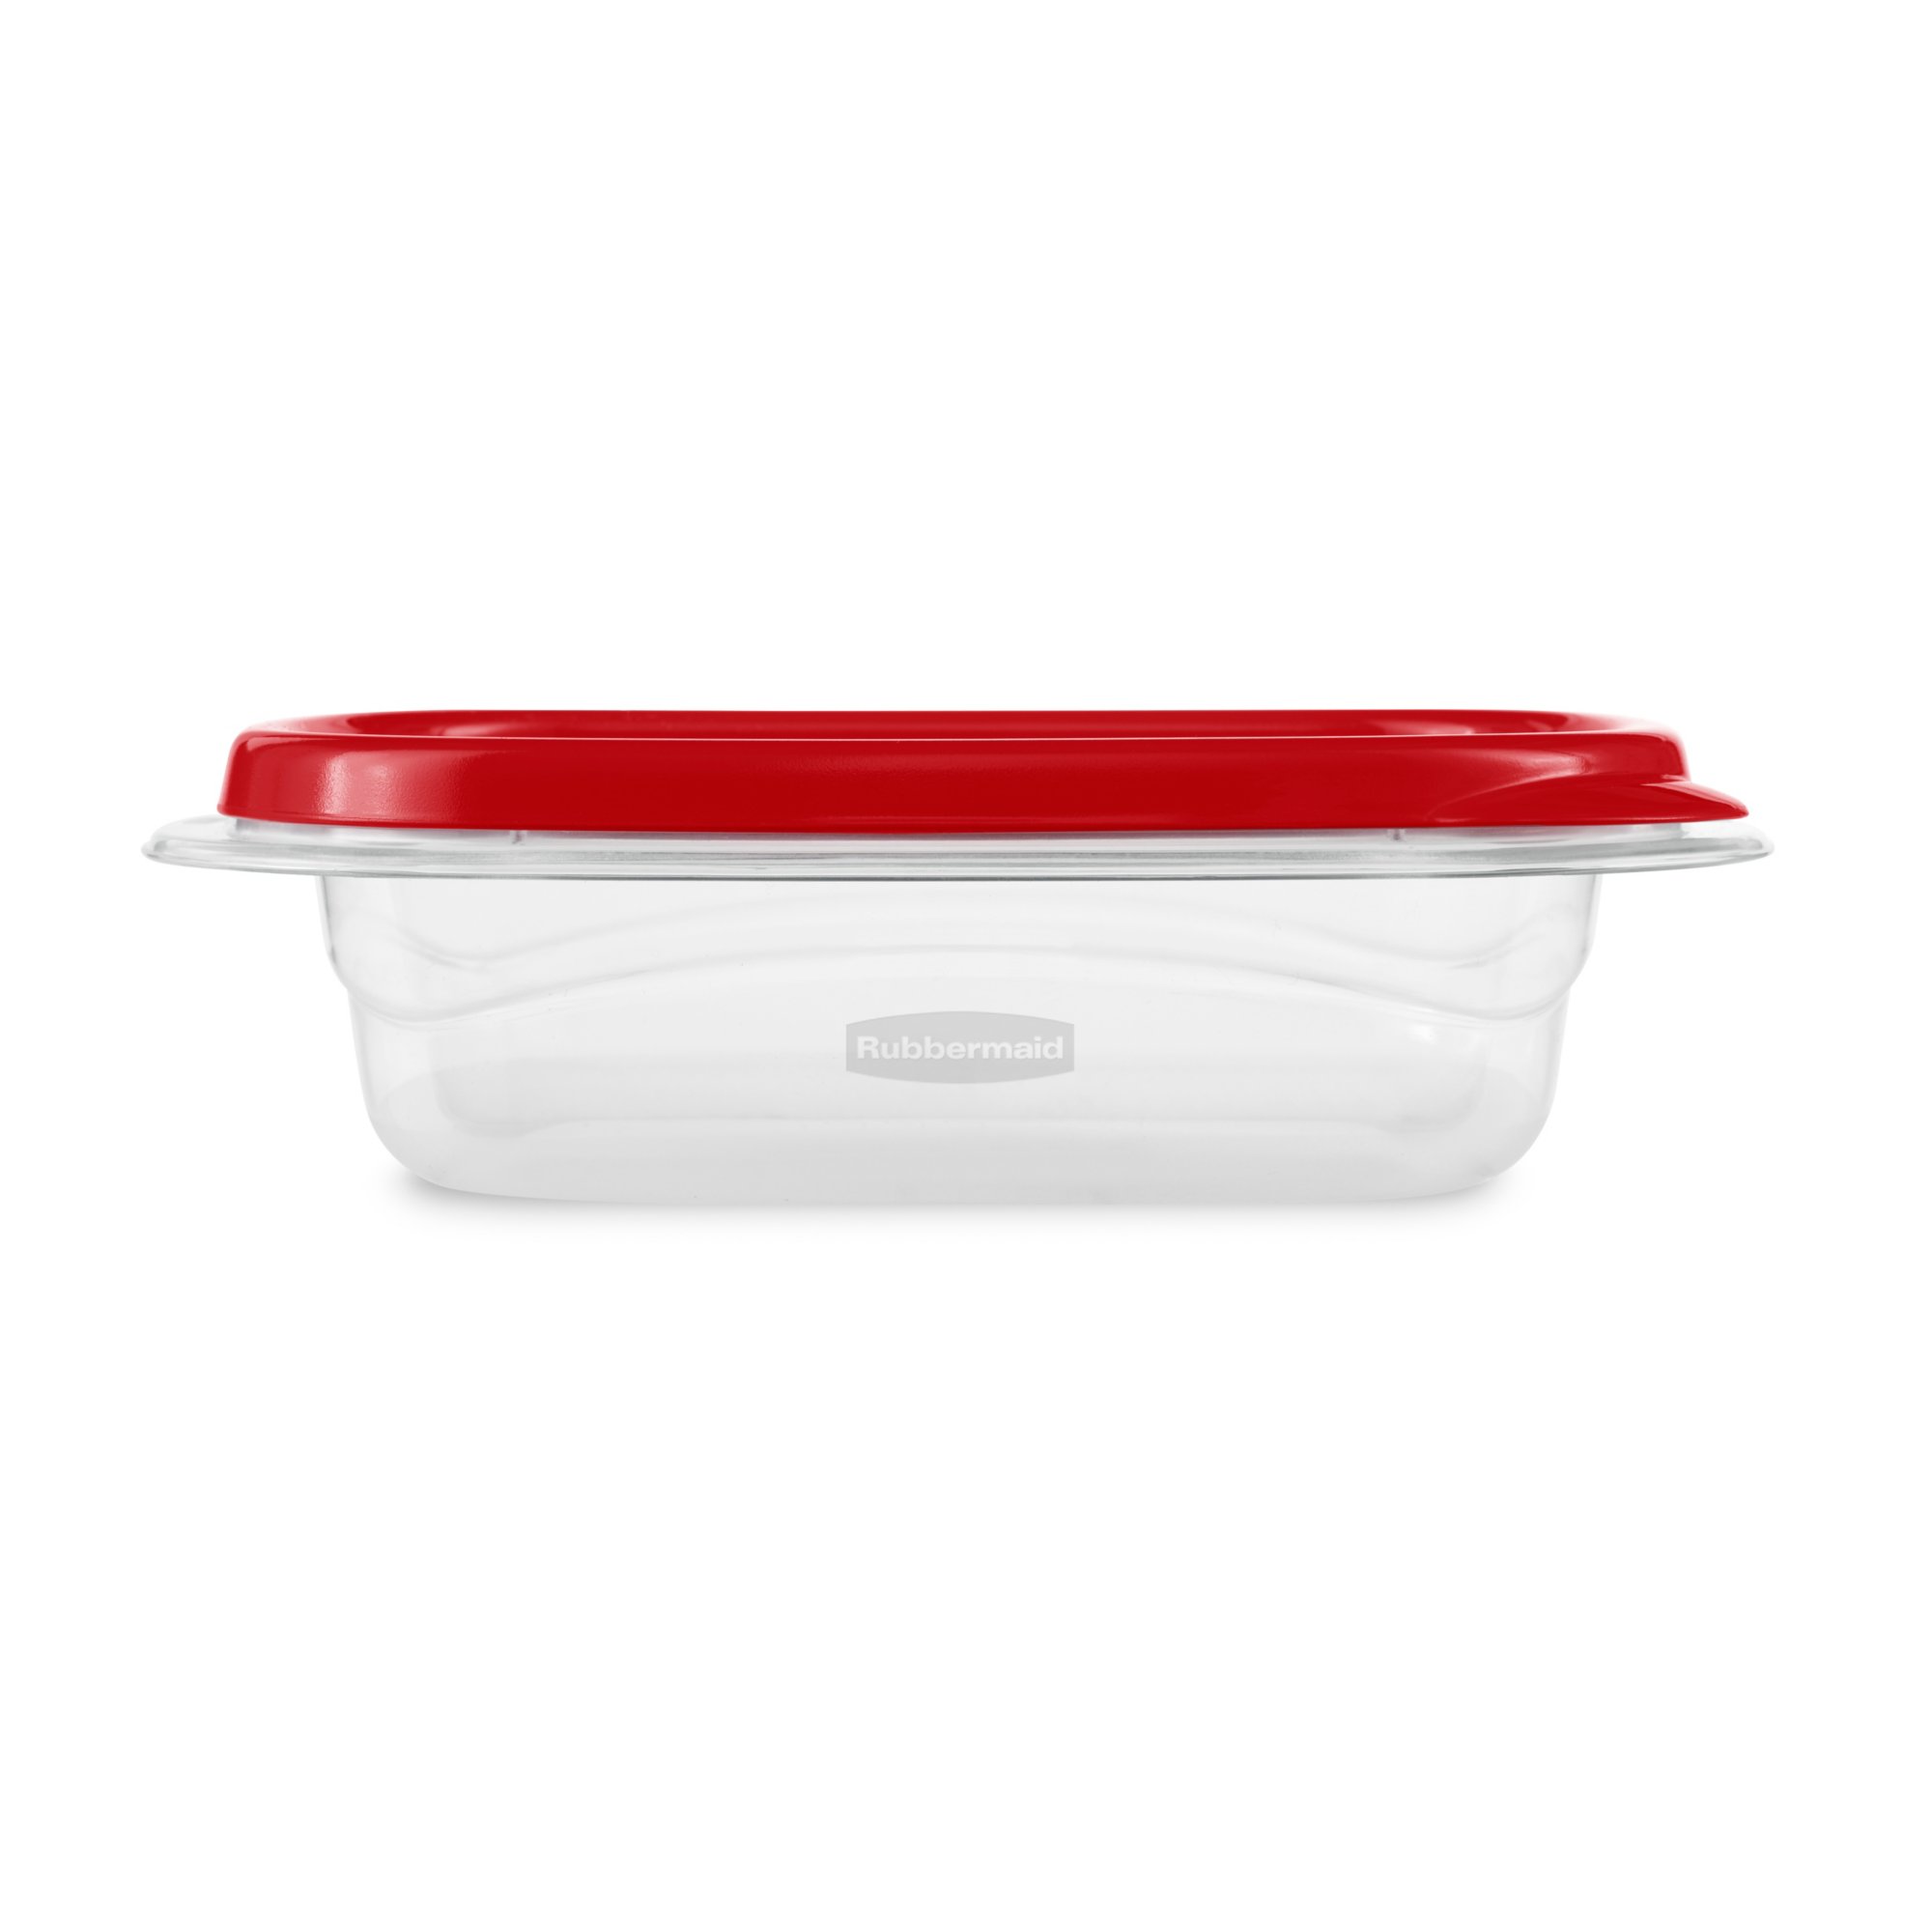 https://s7d9.scene7.com/is/image/NewellRubbermaid/2075788-rubbermaid-food-storage-takealong-red-1.5c-with-lid-straight-on?wid=2000&hei=2000